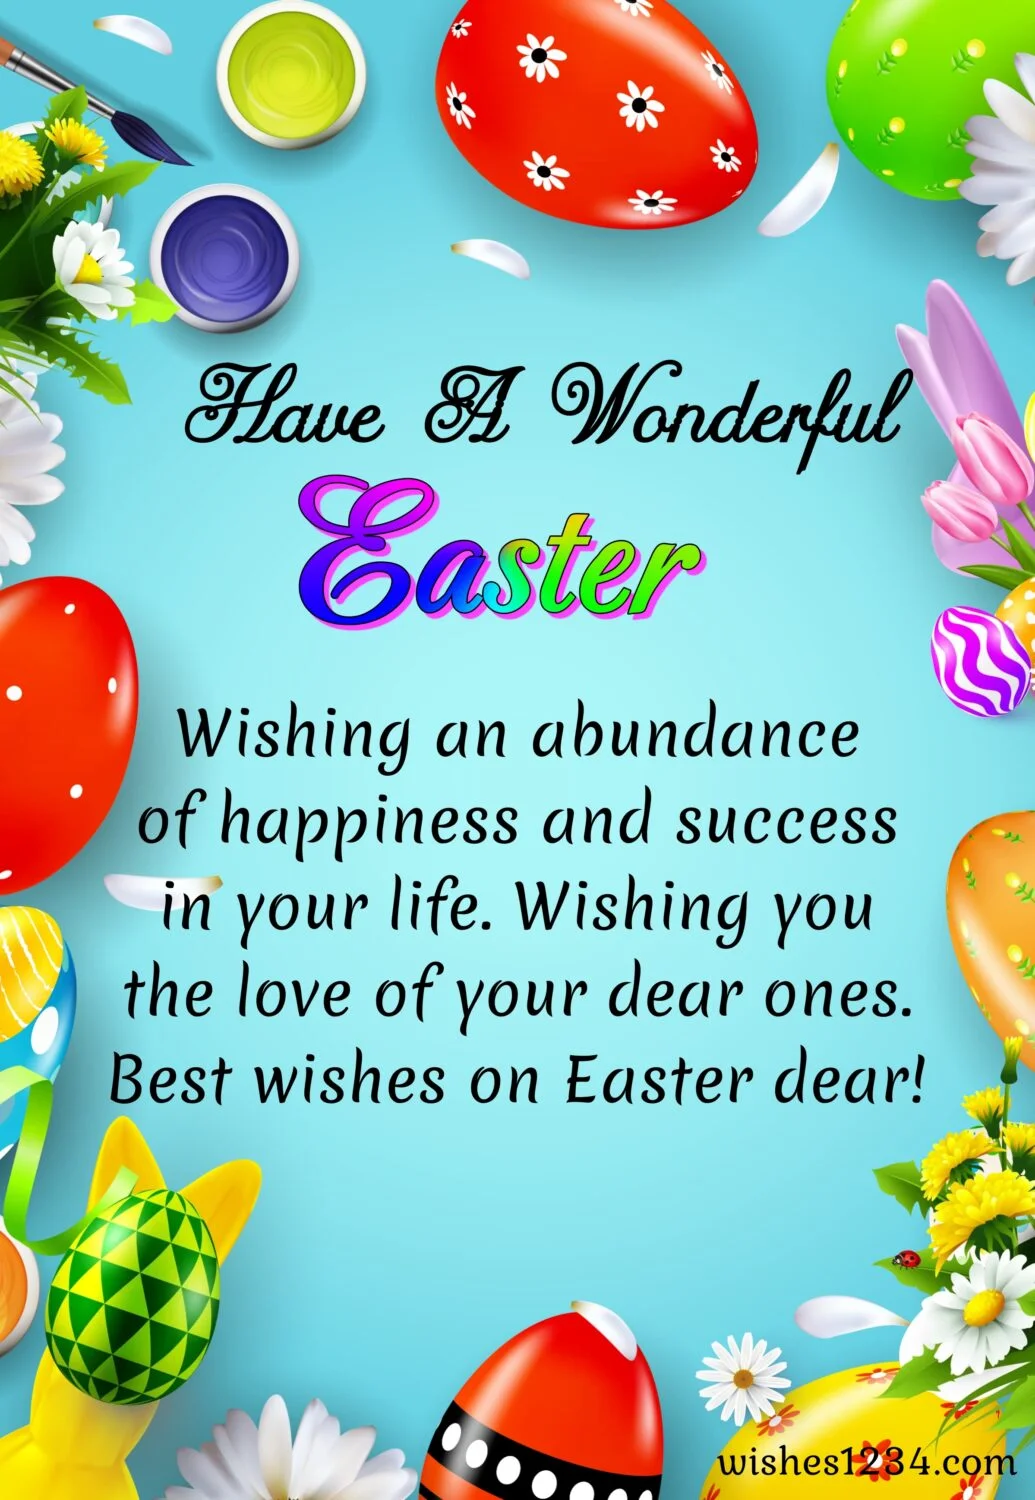 Easter Eggs border, Happy Easter Wishes, Quotes & Images.